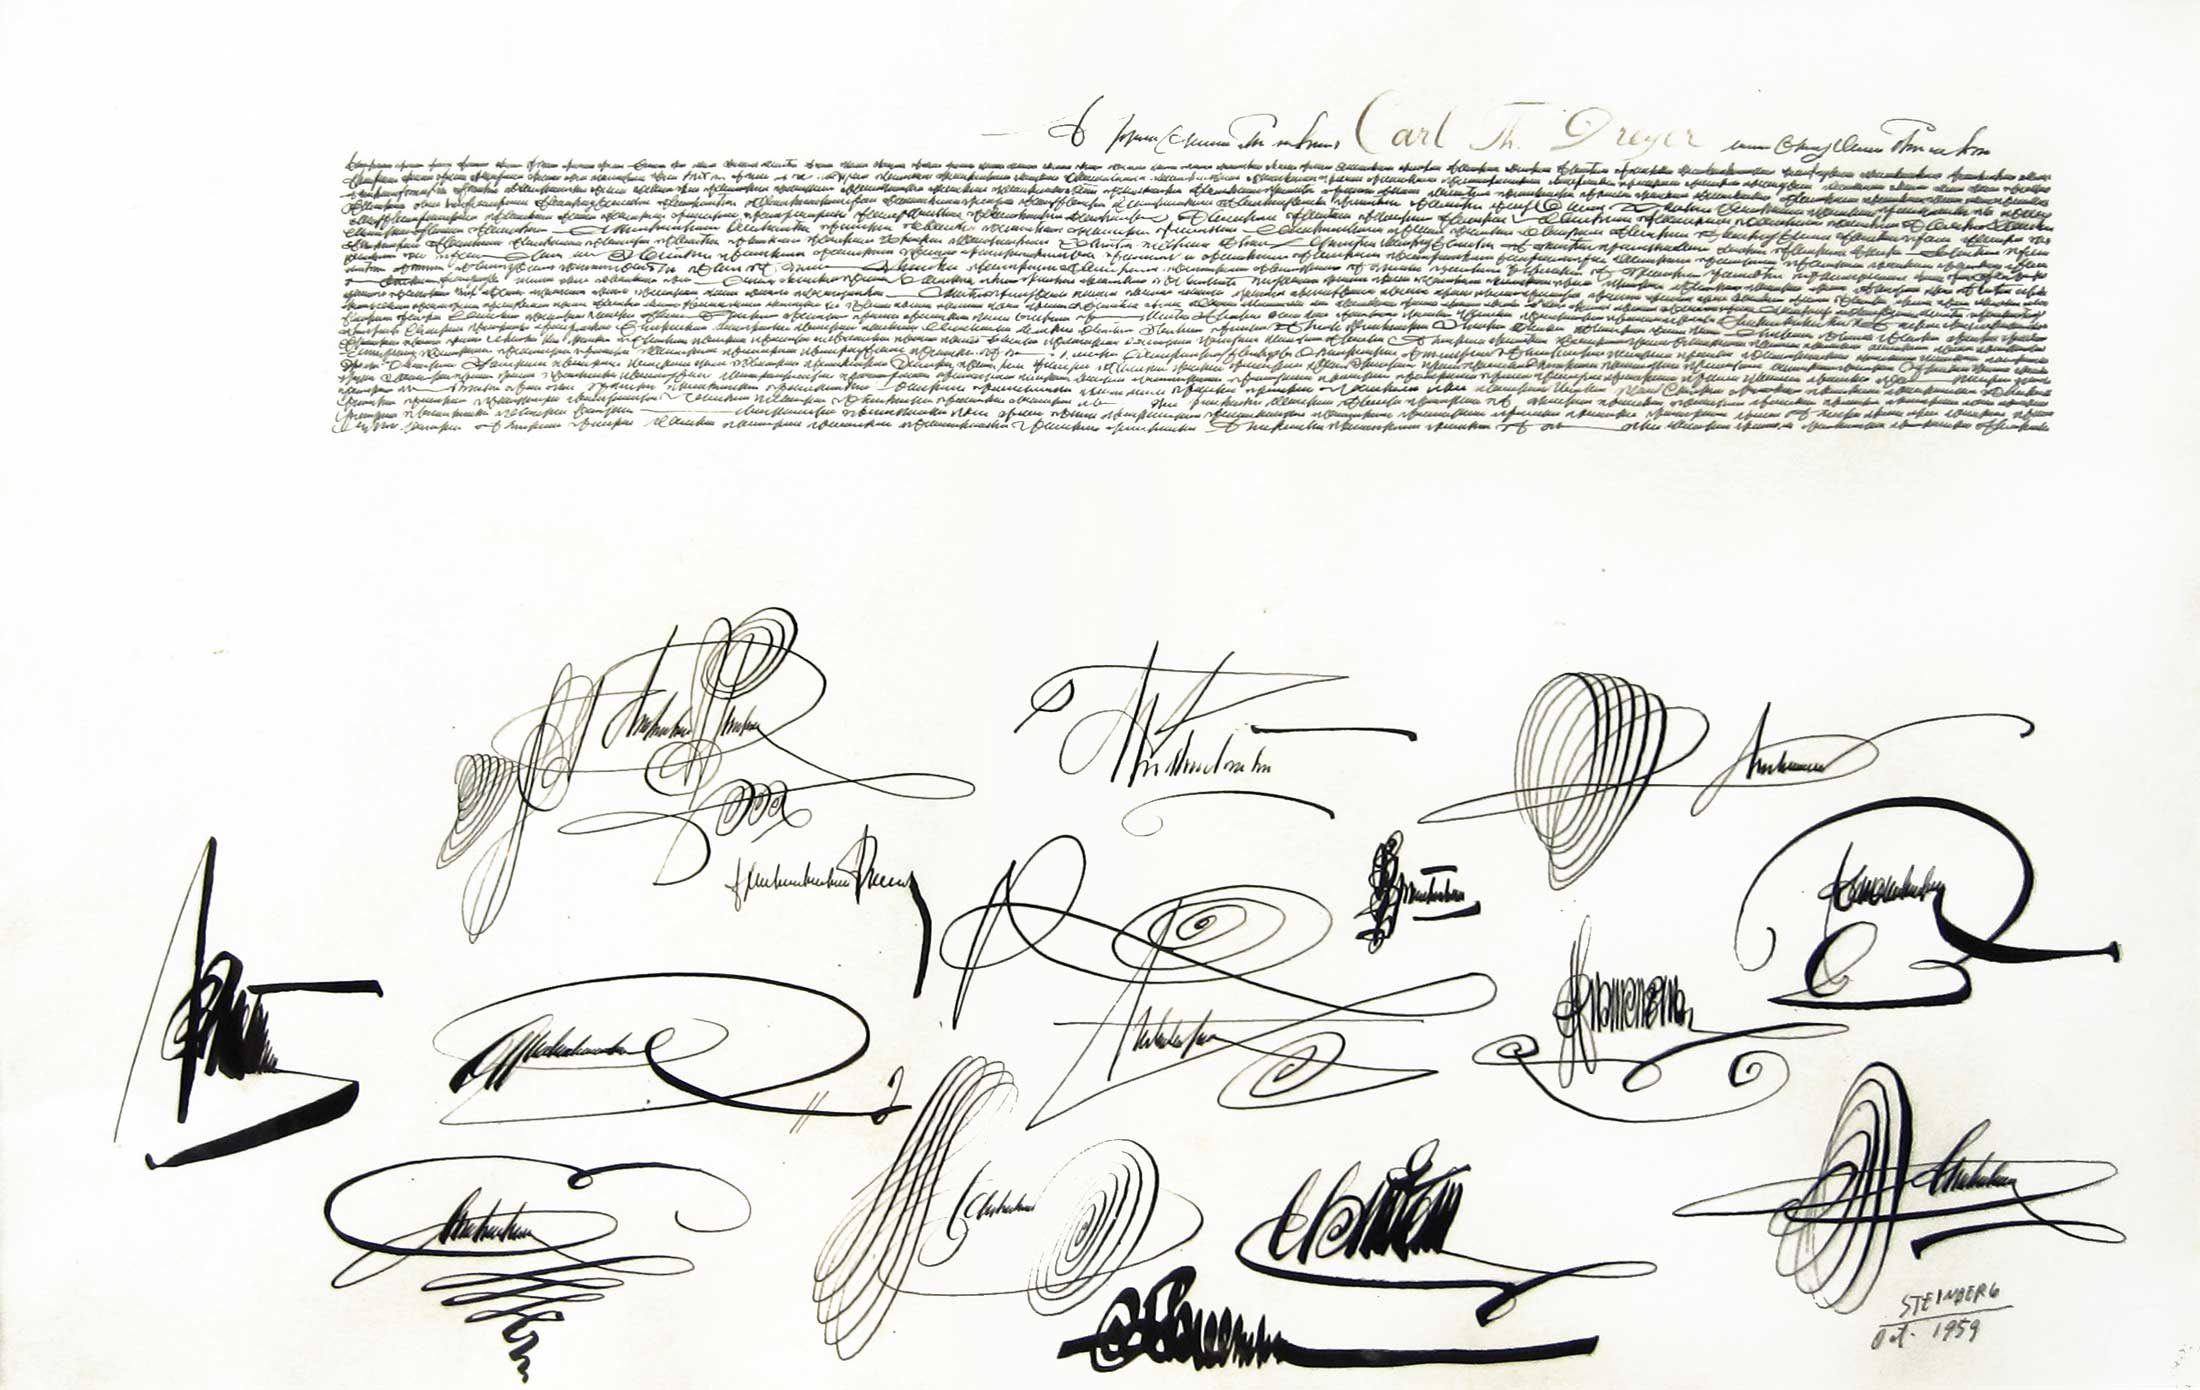 <em>The Declaration of Independence</em>, 1949-54 (inscribed to Carl Theodor Dreyer and dated to the time of the gift, 1959). Ink on paper, 14 ½ x 22 ¾ in. Private collection.